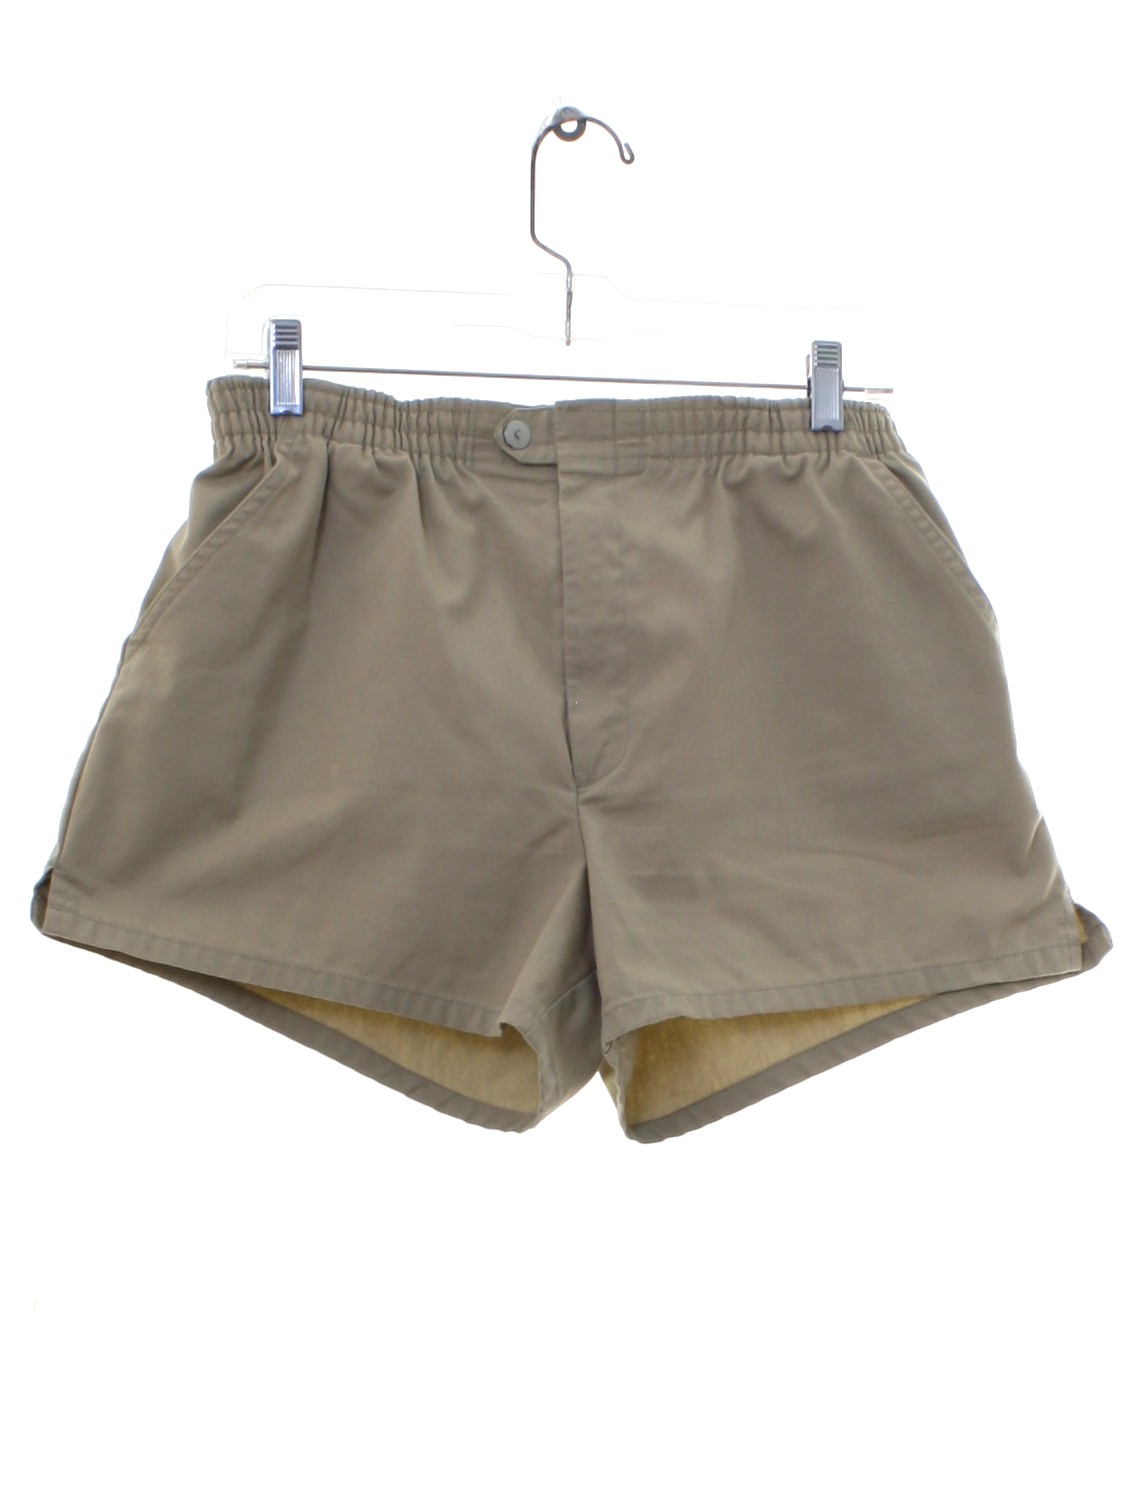 Vintage 1980's Shorts: 80s -Care and Fabric Labels- Mens khaki ...